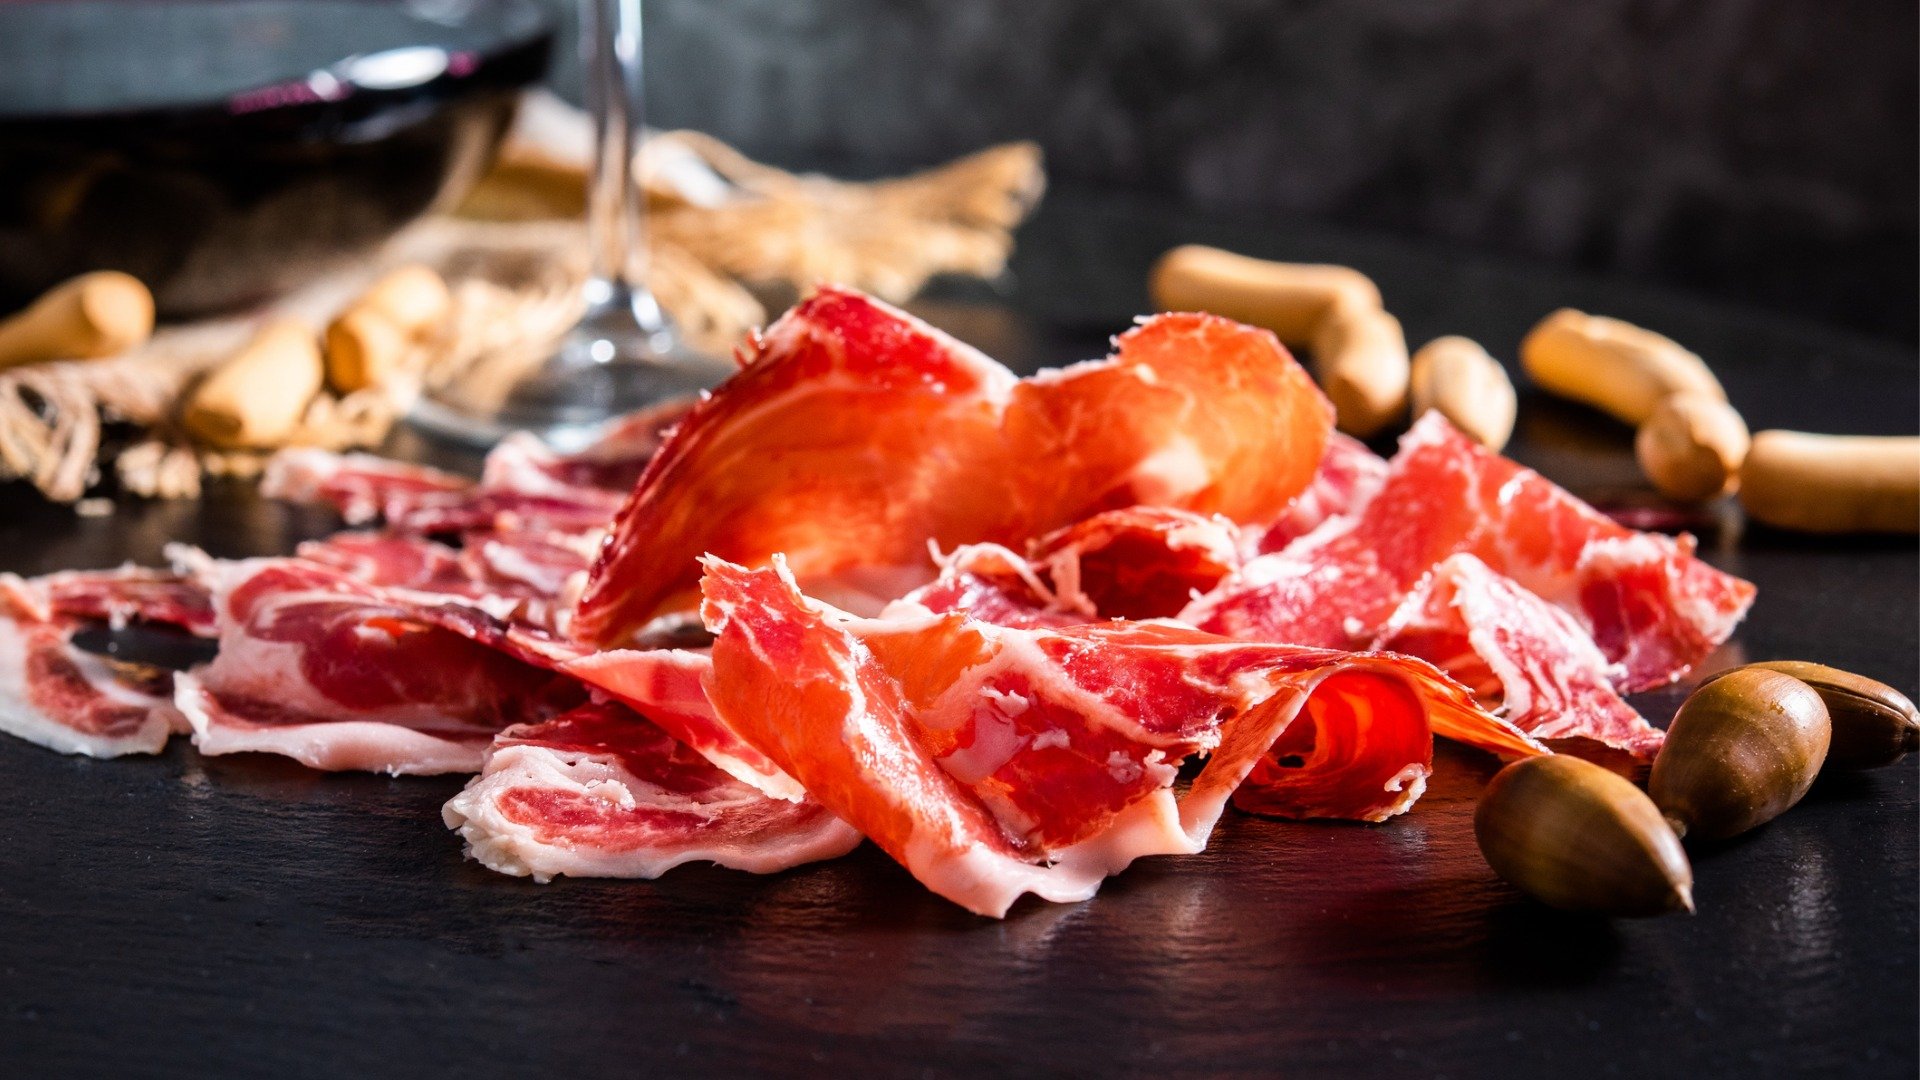 This is a close-up of jamon iberico slices. 